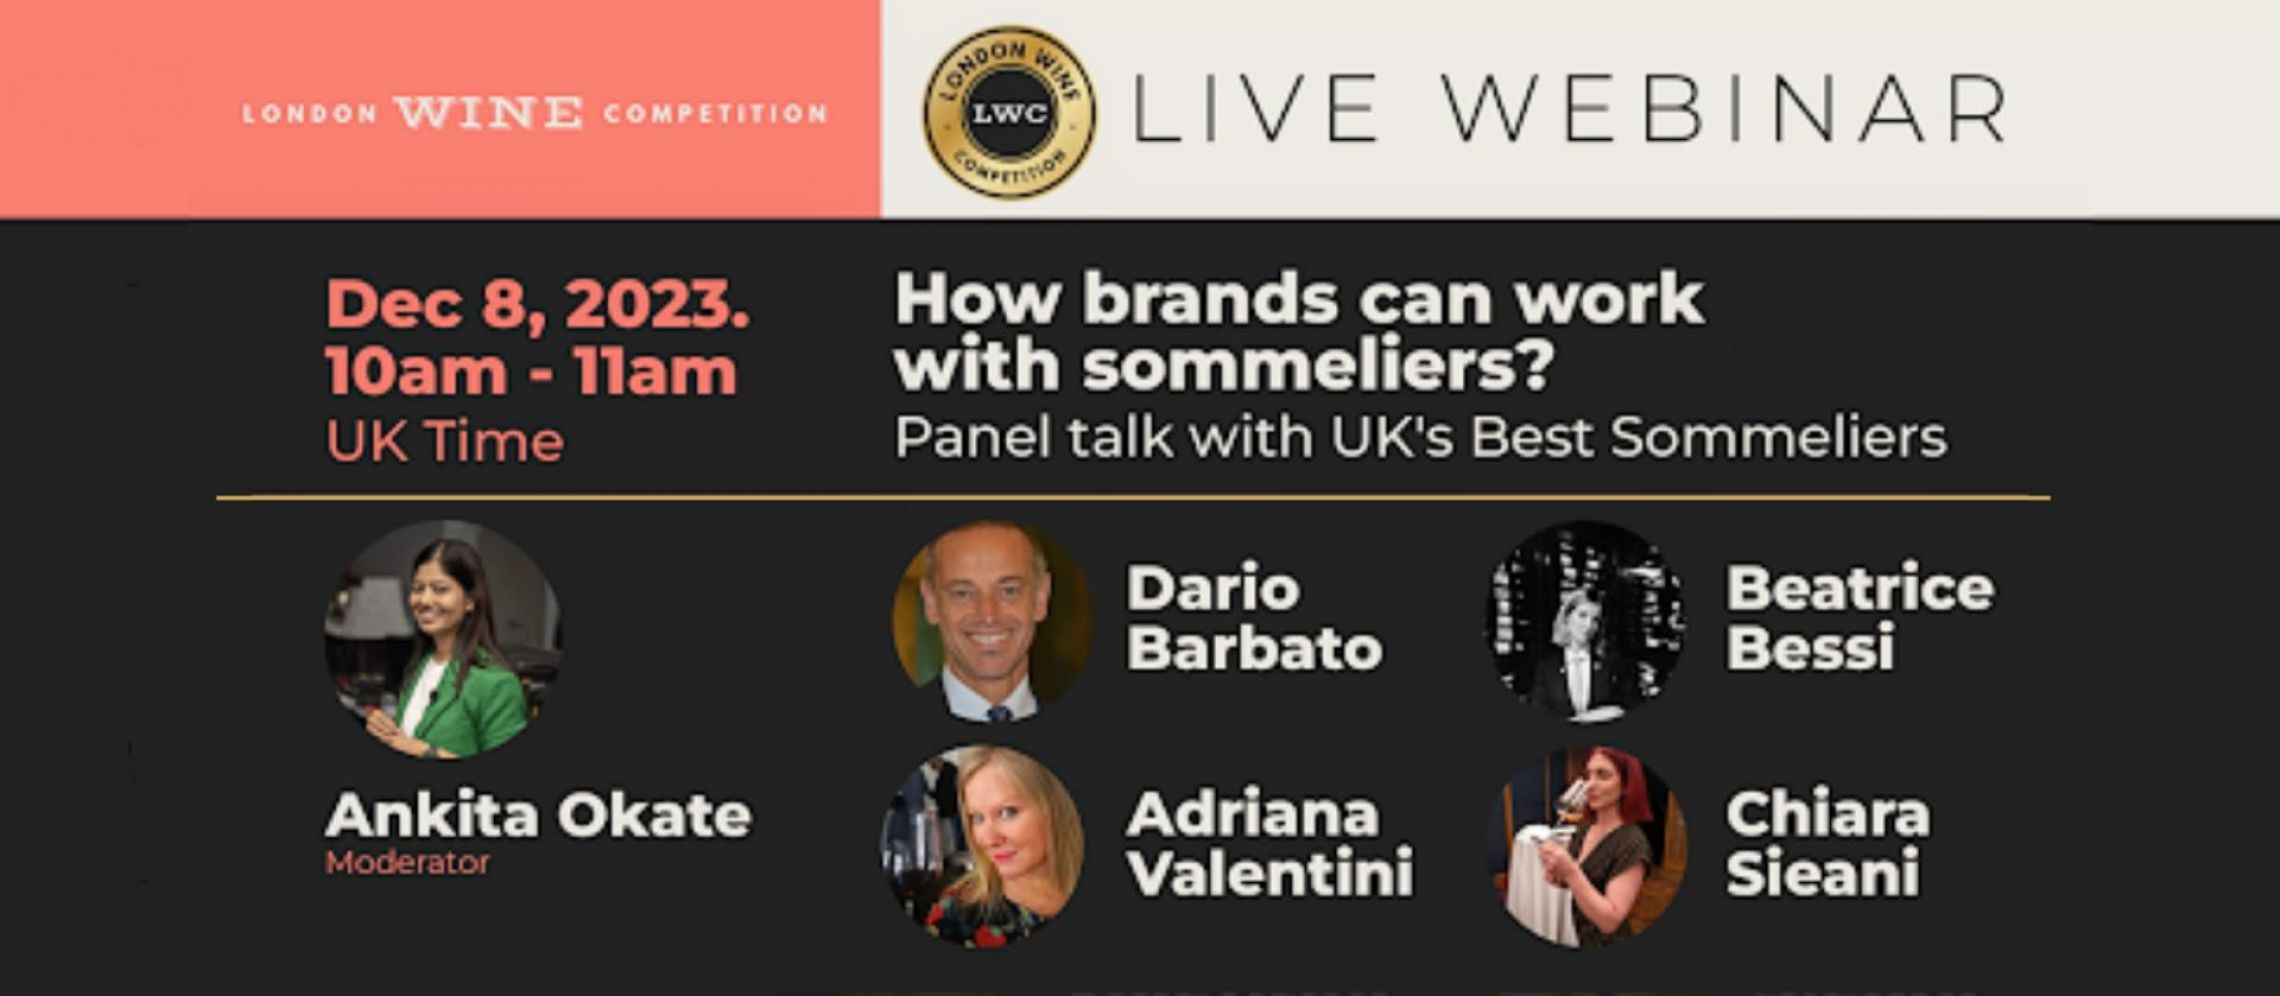 Photo for: London Wine Competition Webinar: How Brands Can Work With Sommeliers In 2024